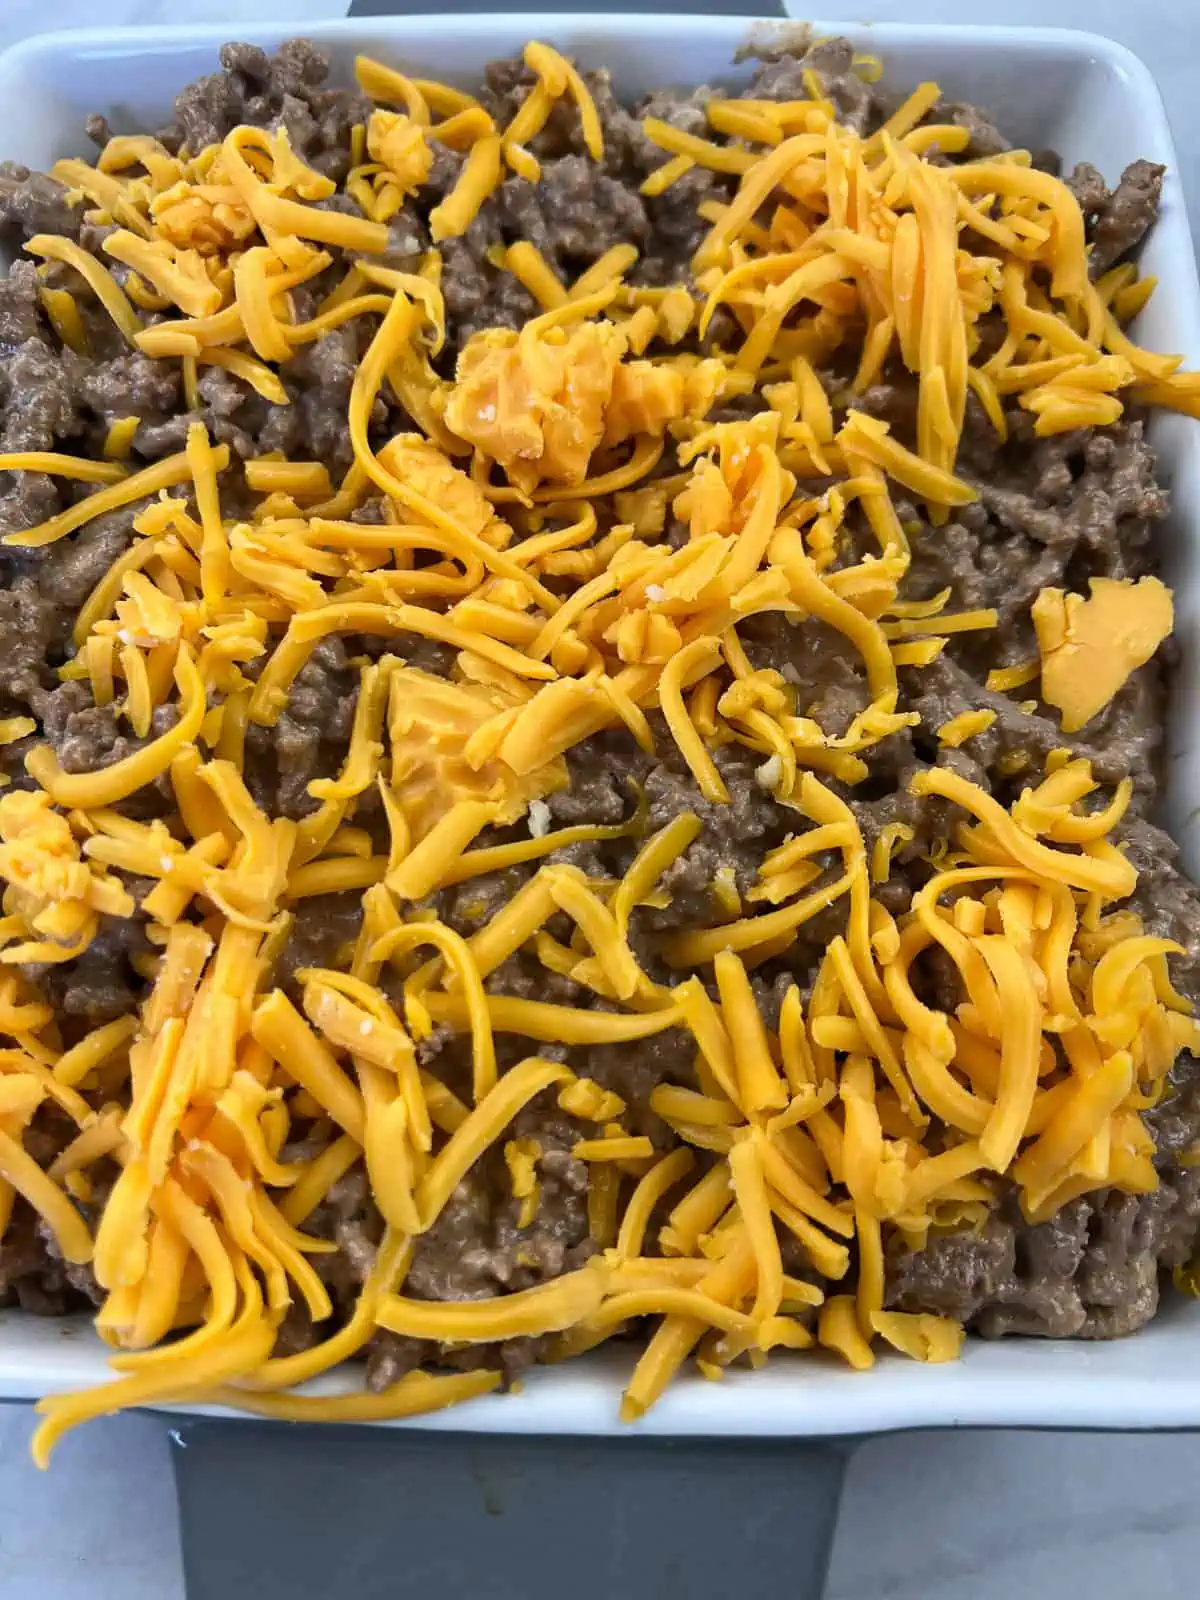 Layered into a baking dish and topped with cheese.